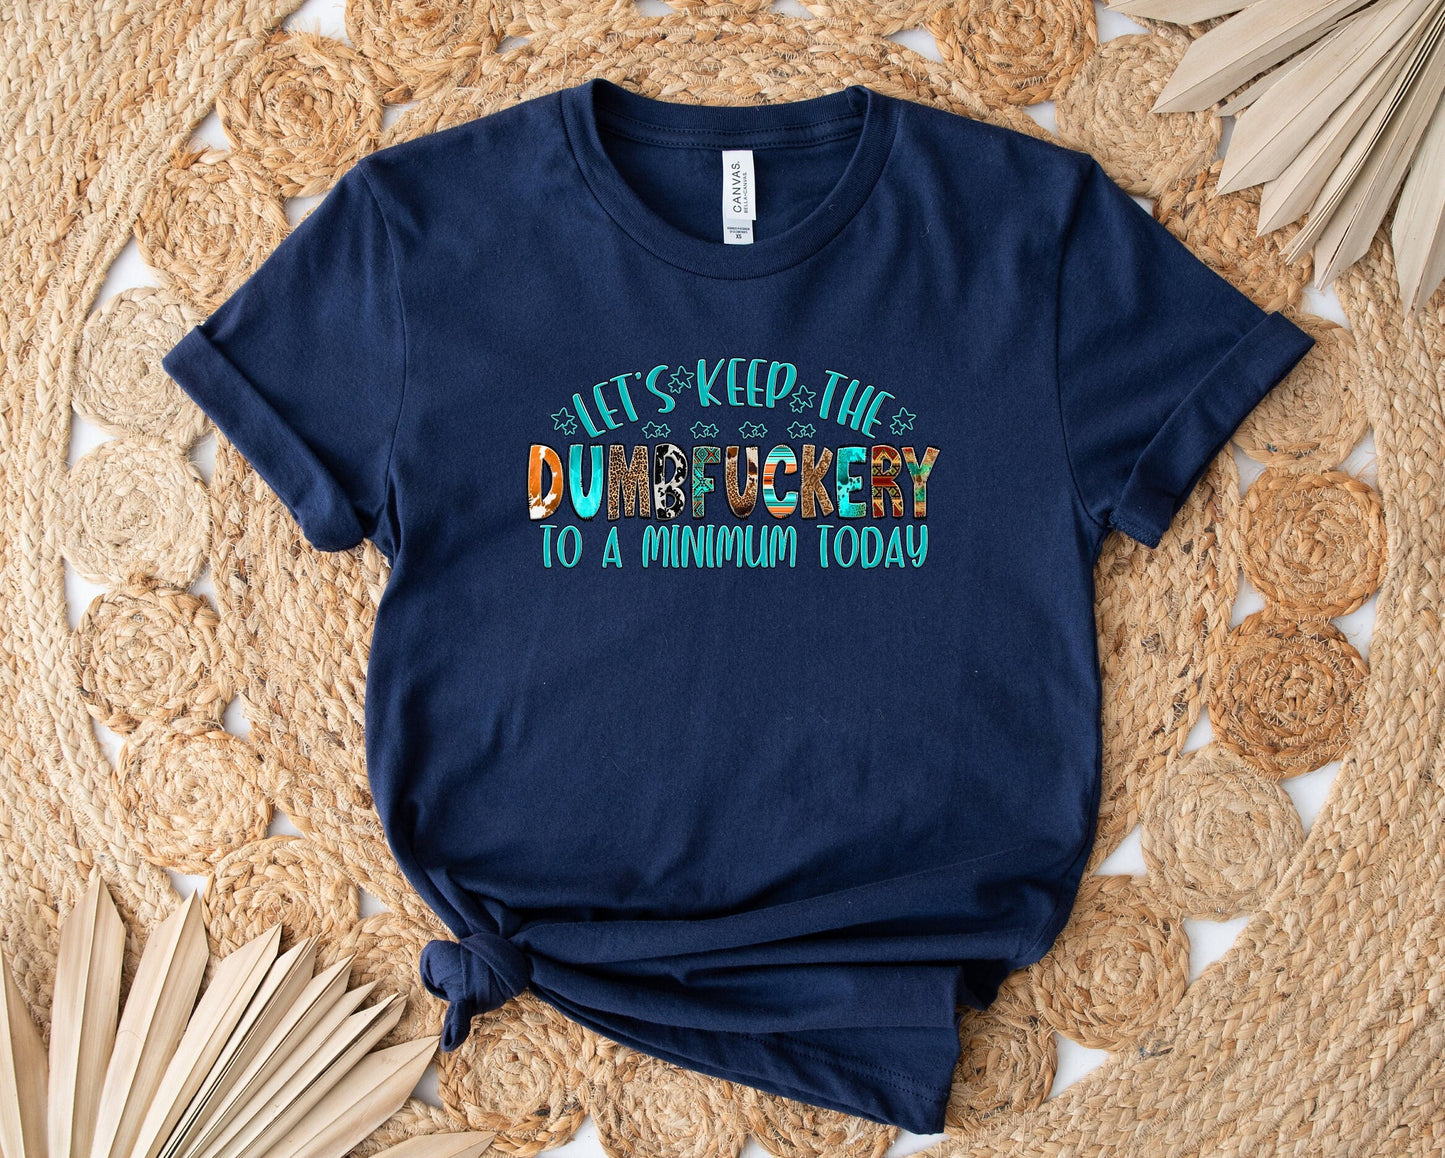 A Stylish, Comfortable yet hilarious Adult Humor T Shirt.  Lets Keep the DumbFuckery to a minimum today shirt.  Get a few laughs with your friends and coworkers with this great Tee.  You&#39;re sure to have a blast time and time again.